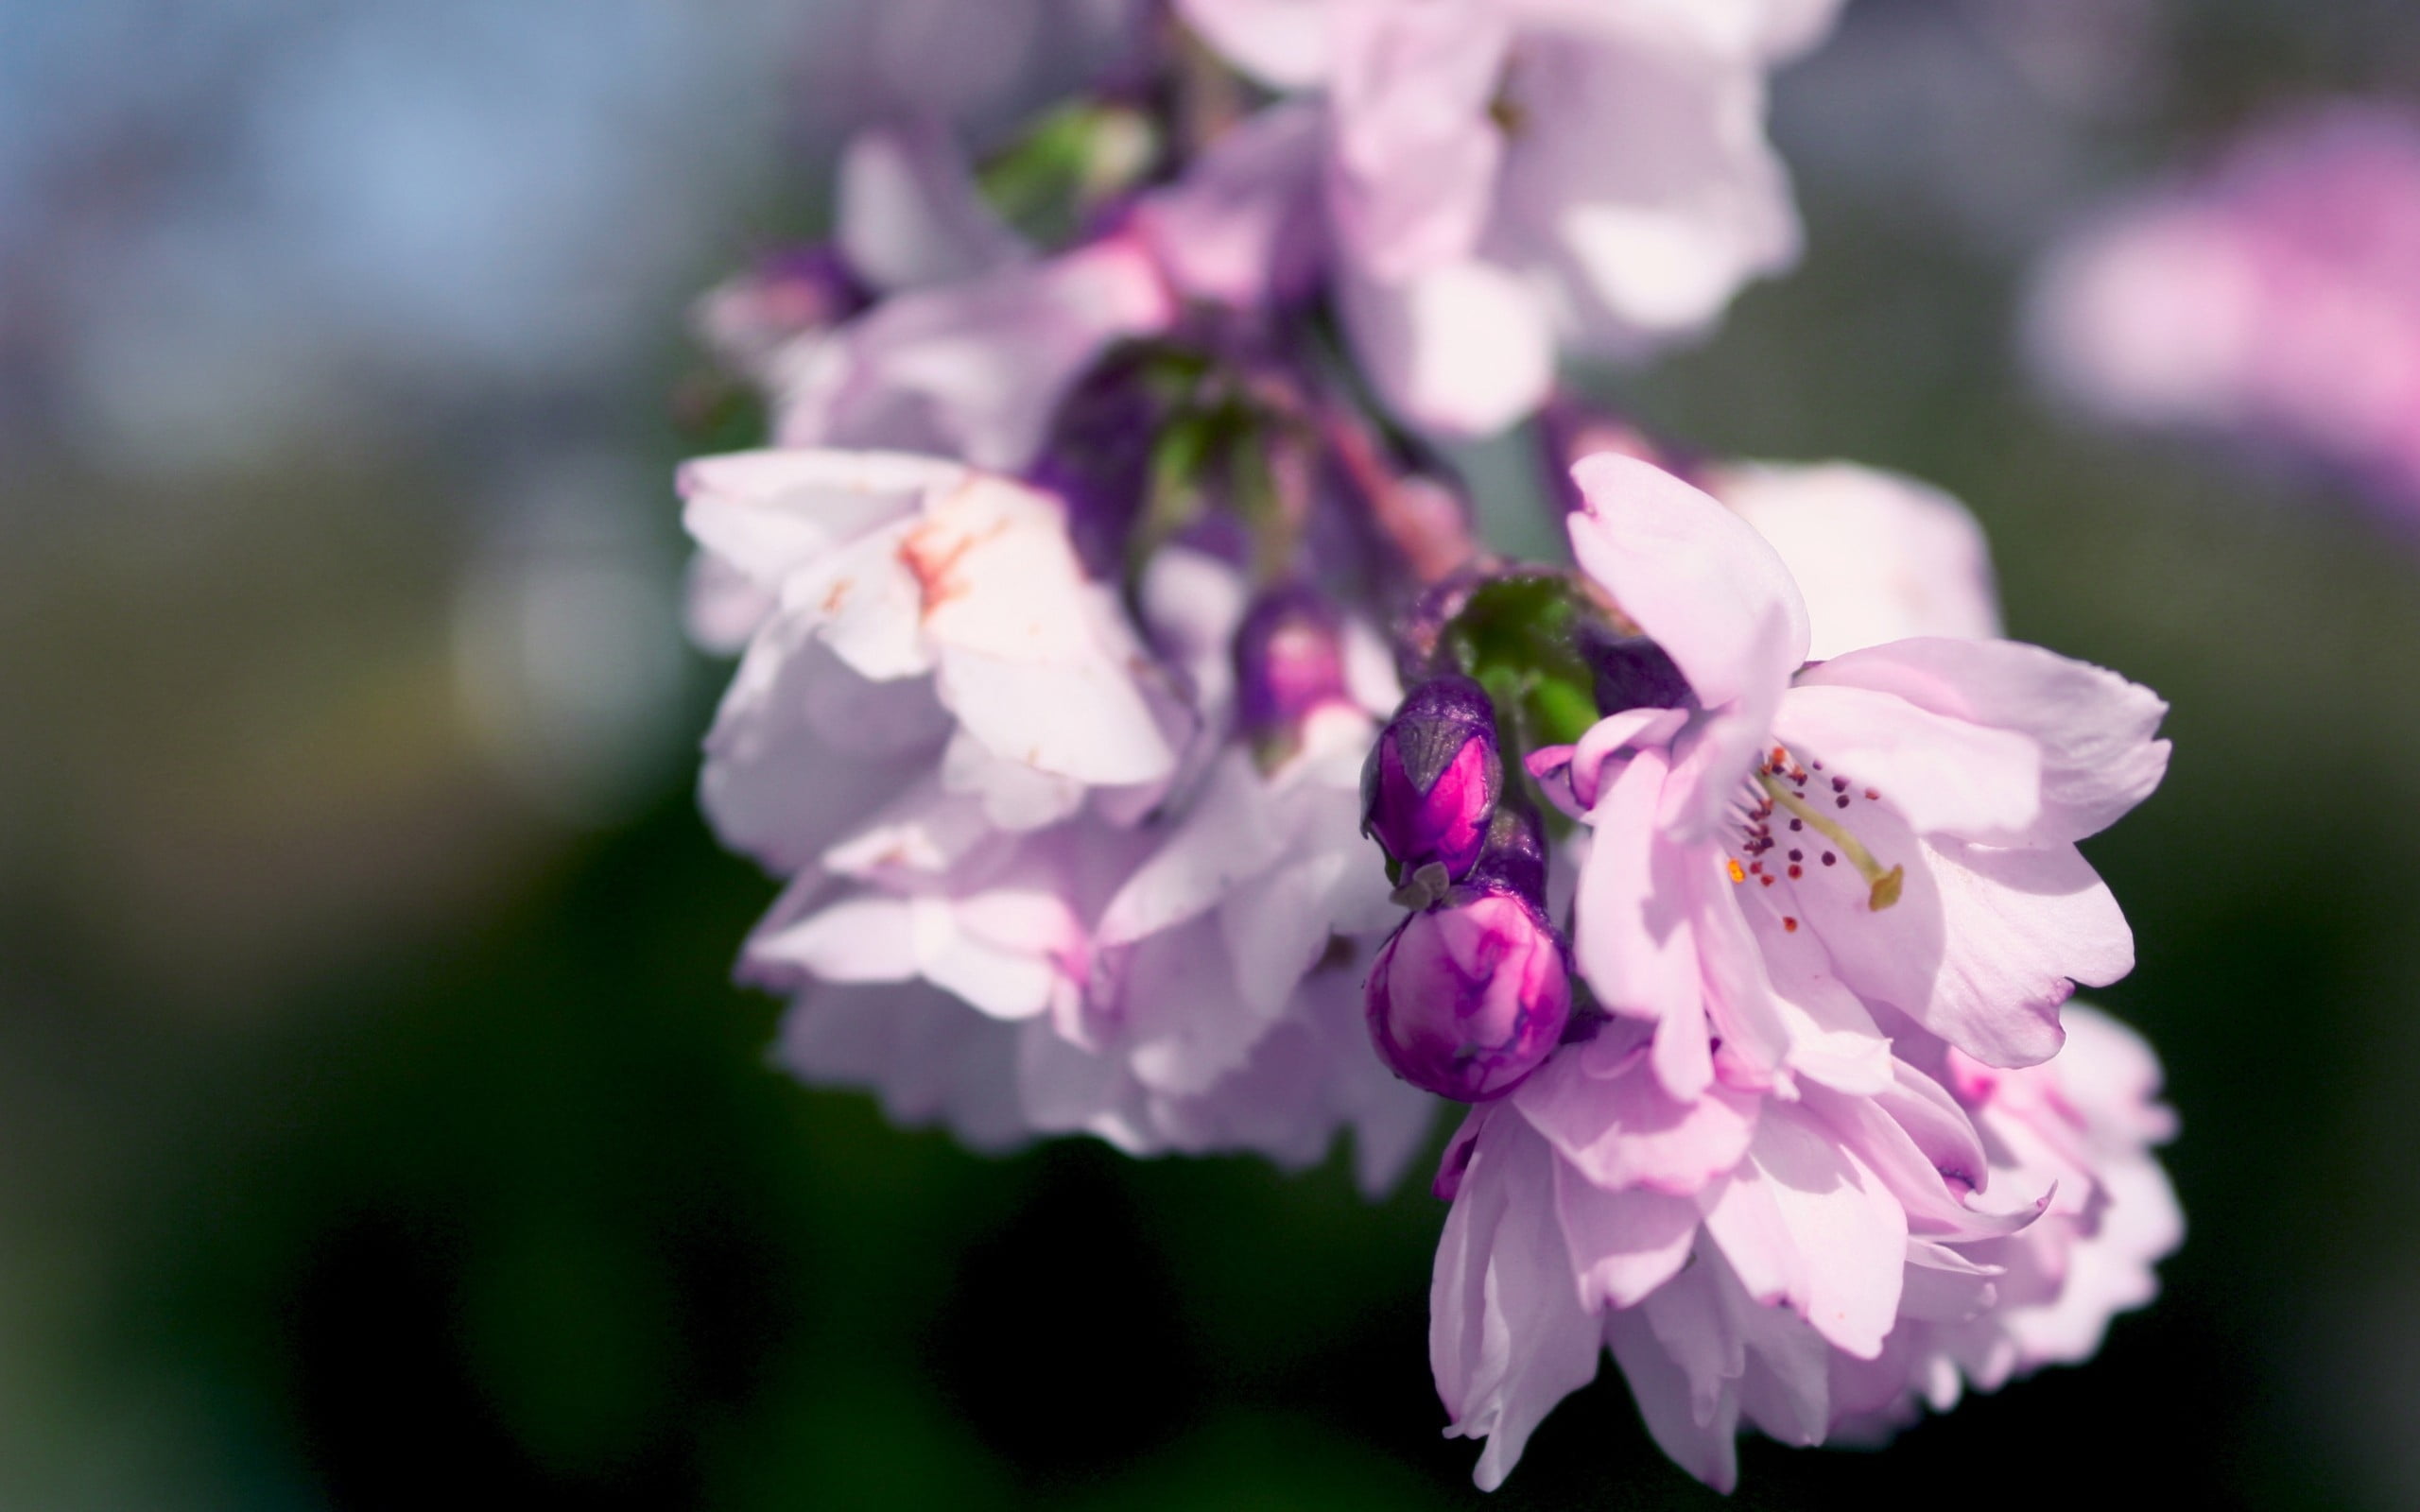 closeup photography of pink Cherry Blossoms flower